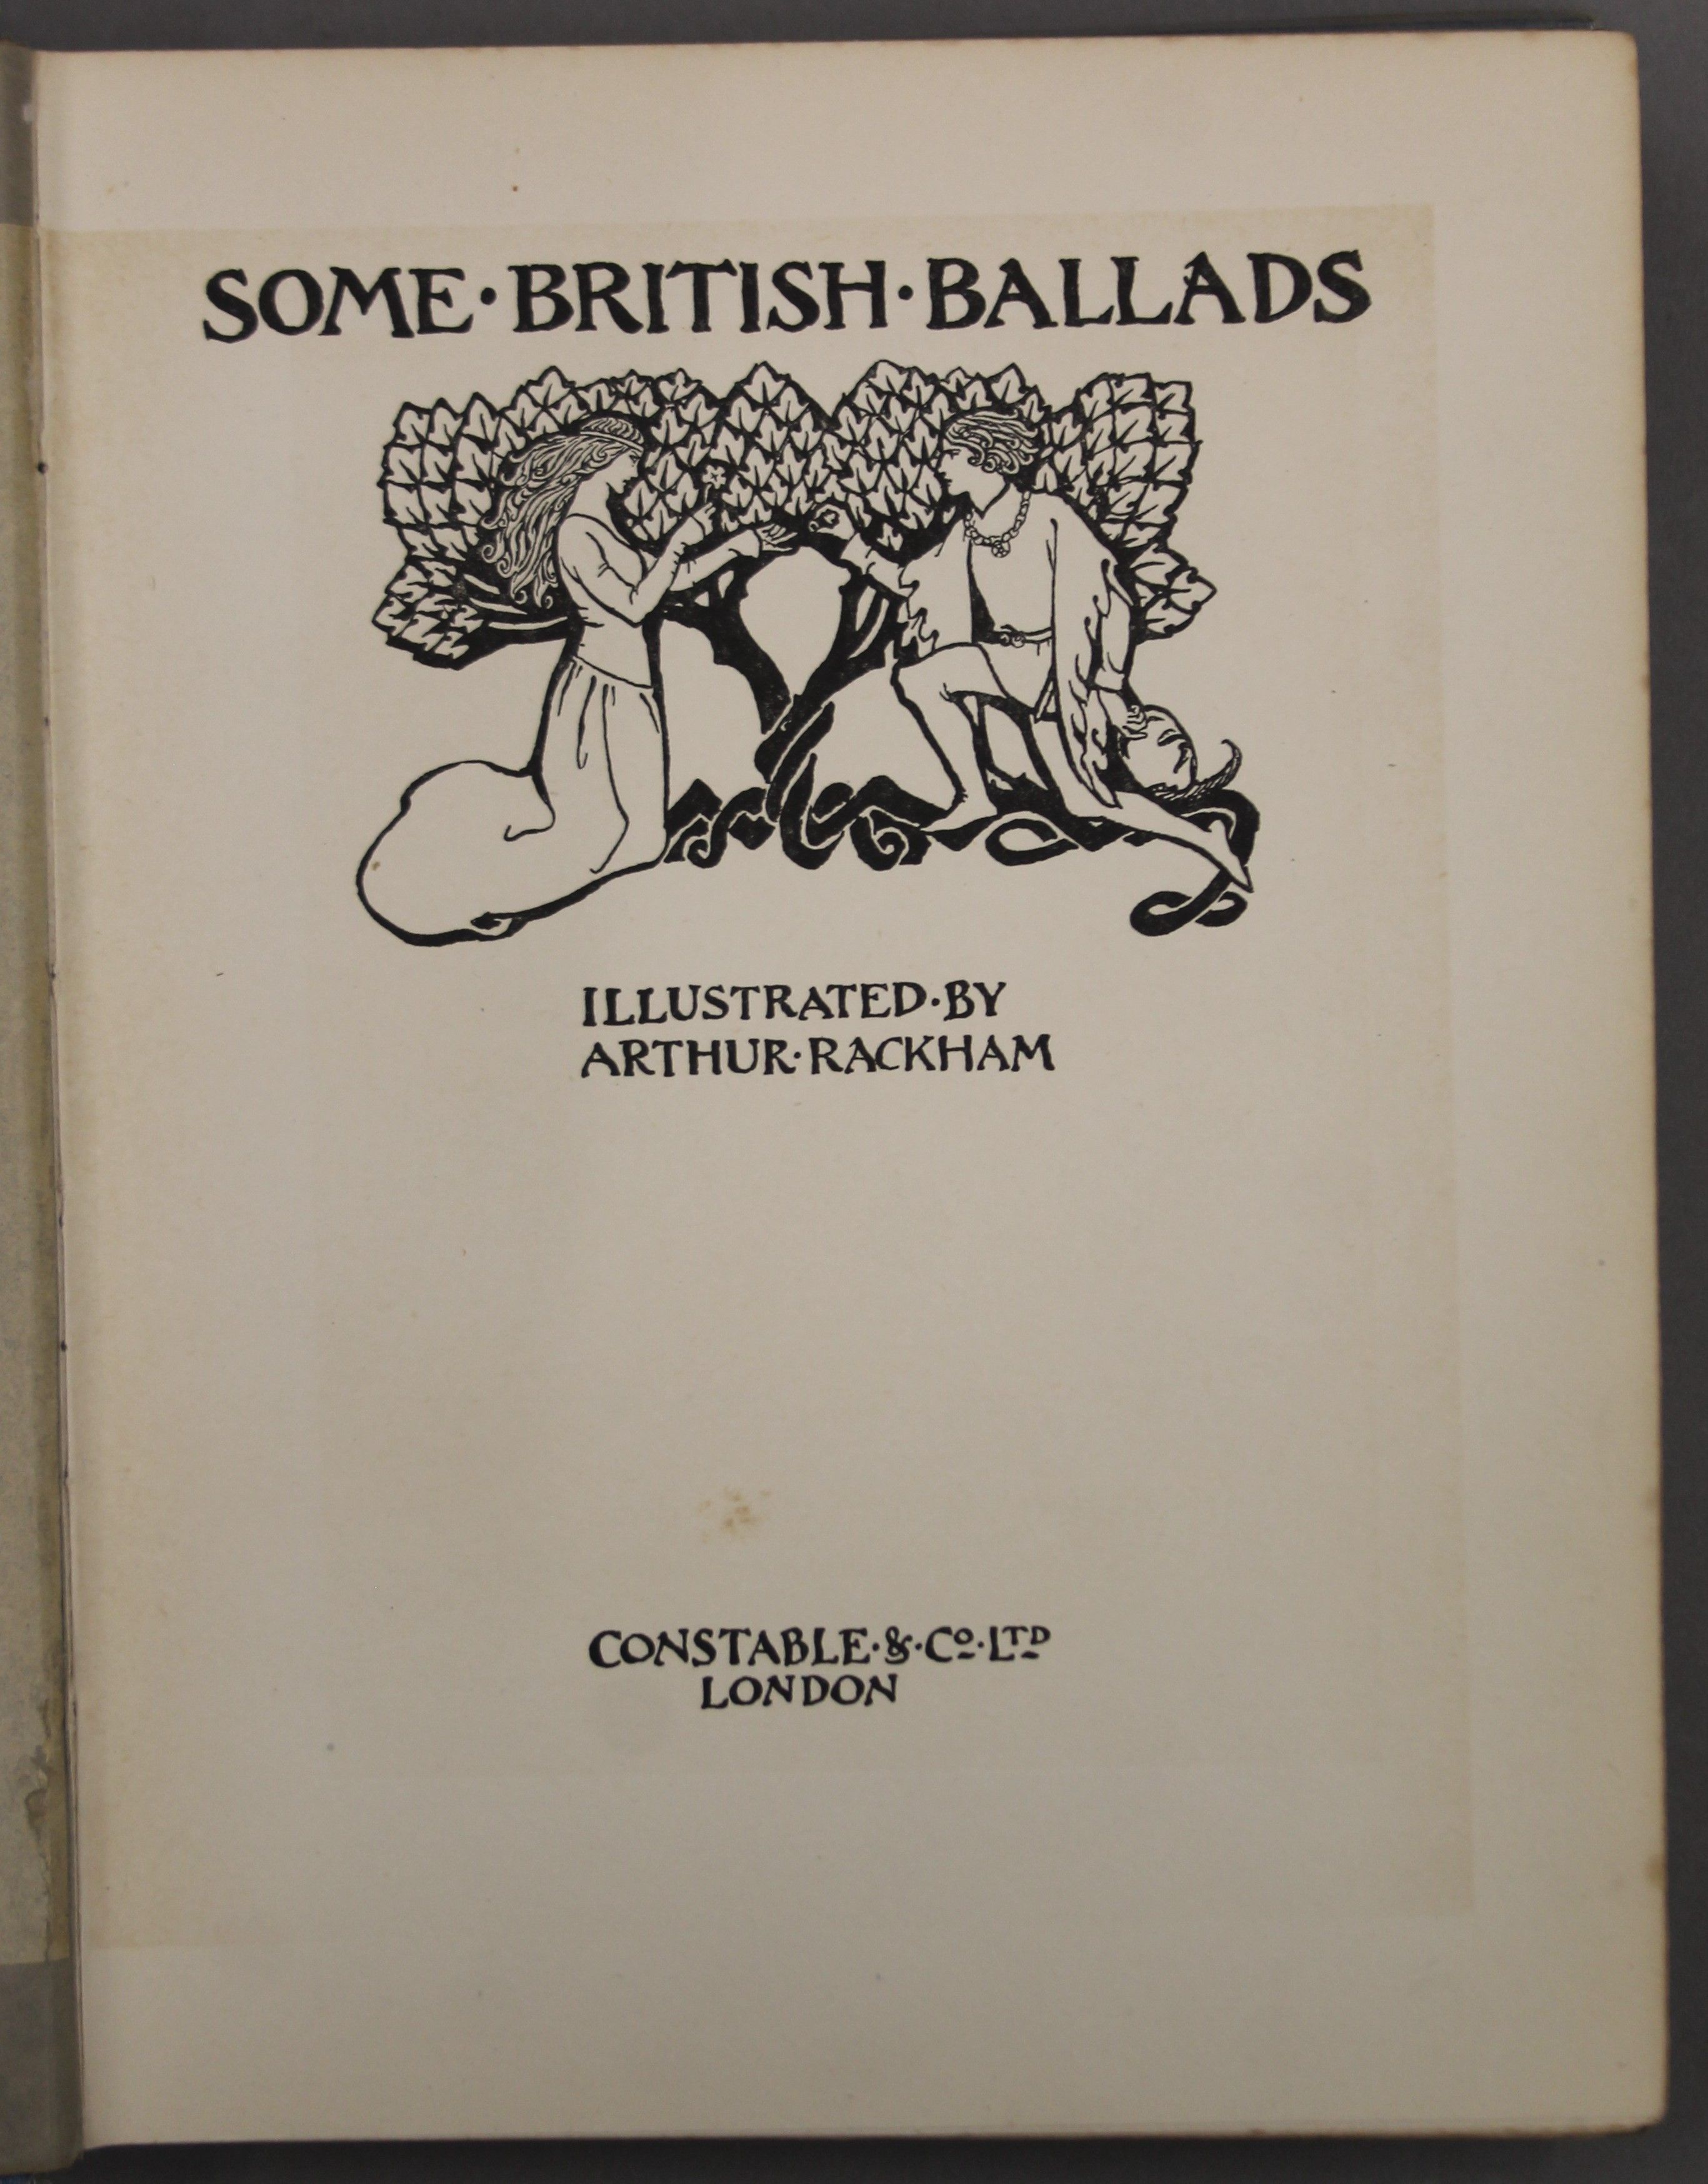 Some British Ballads, illustrated by Arthur Rackham, first trade edition, circa 1919, - Image 3 of 6